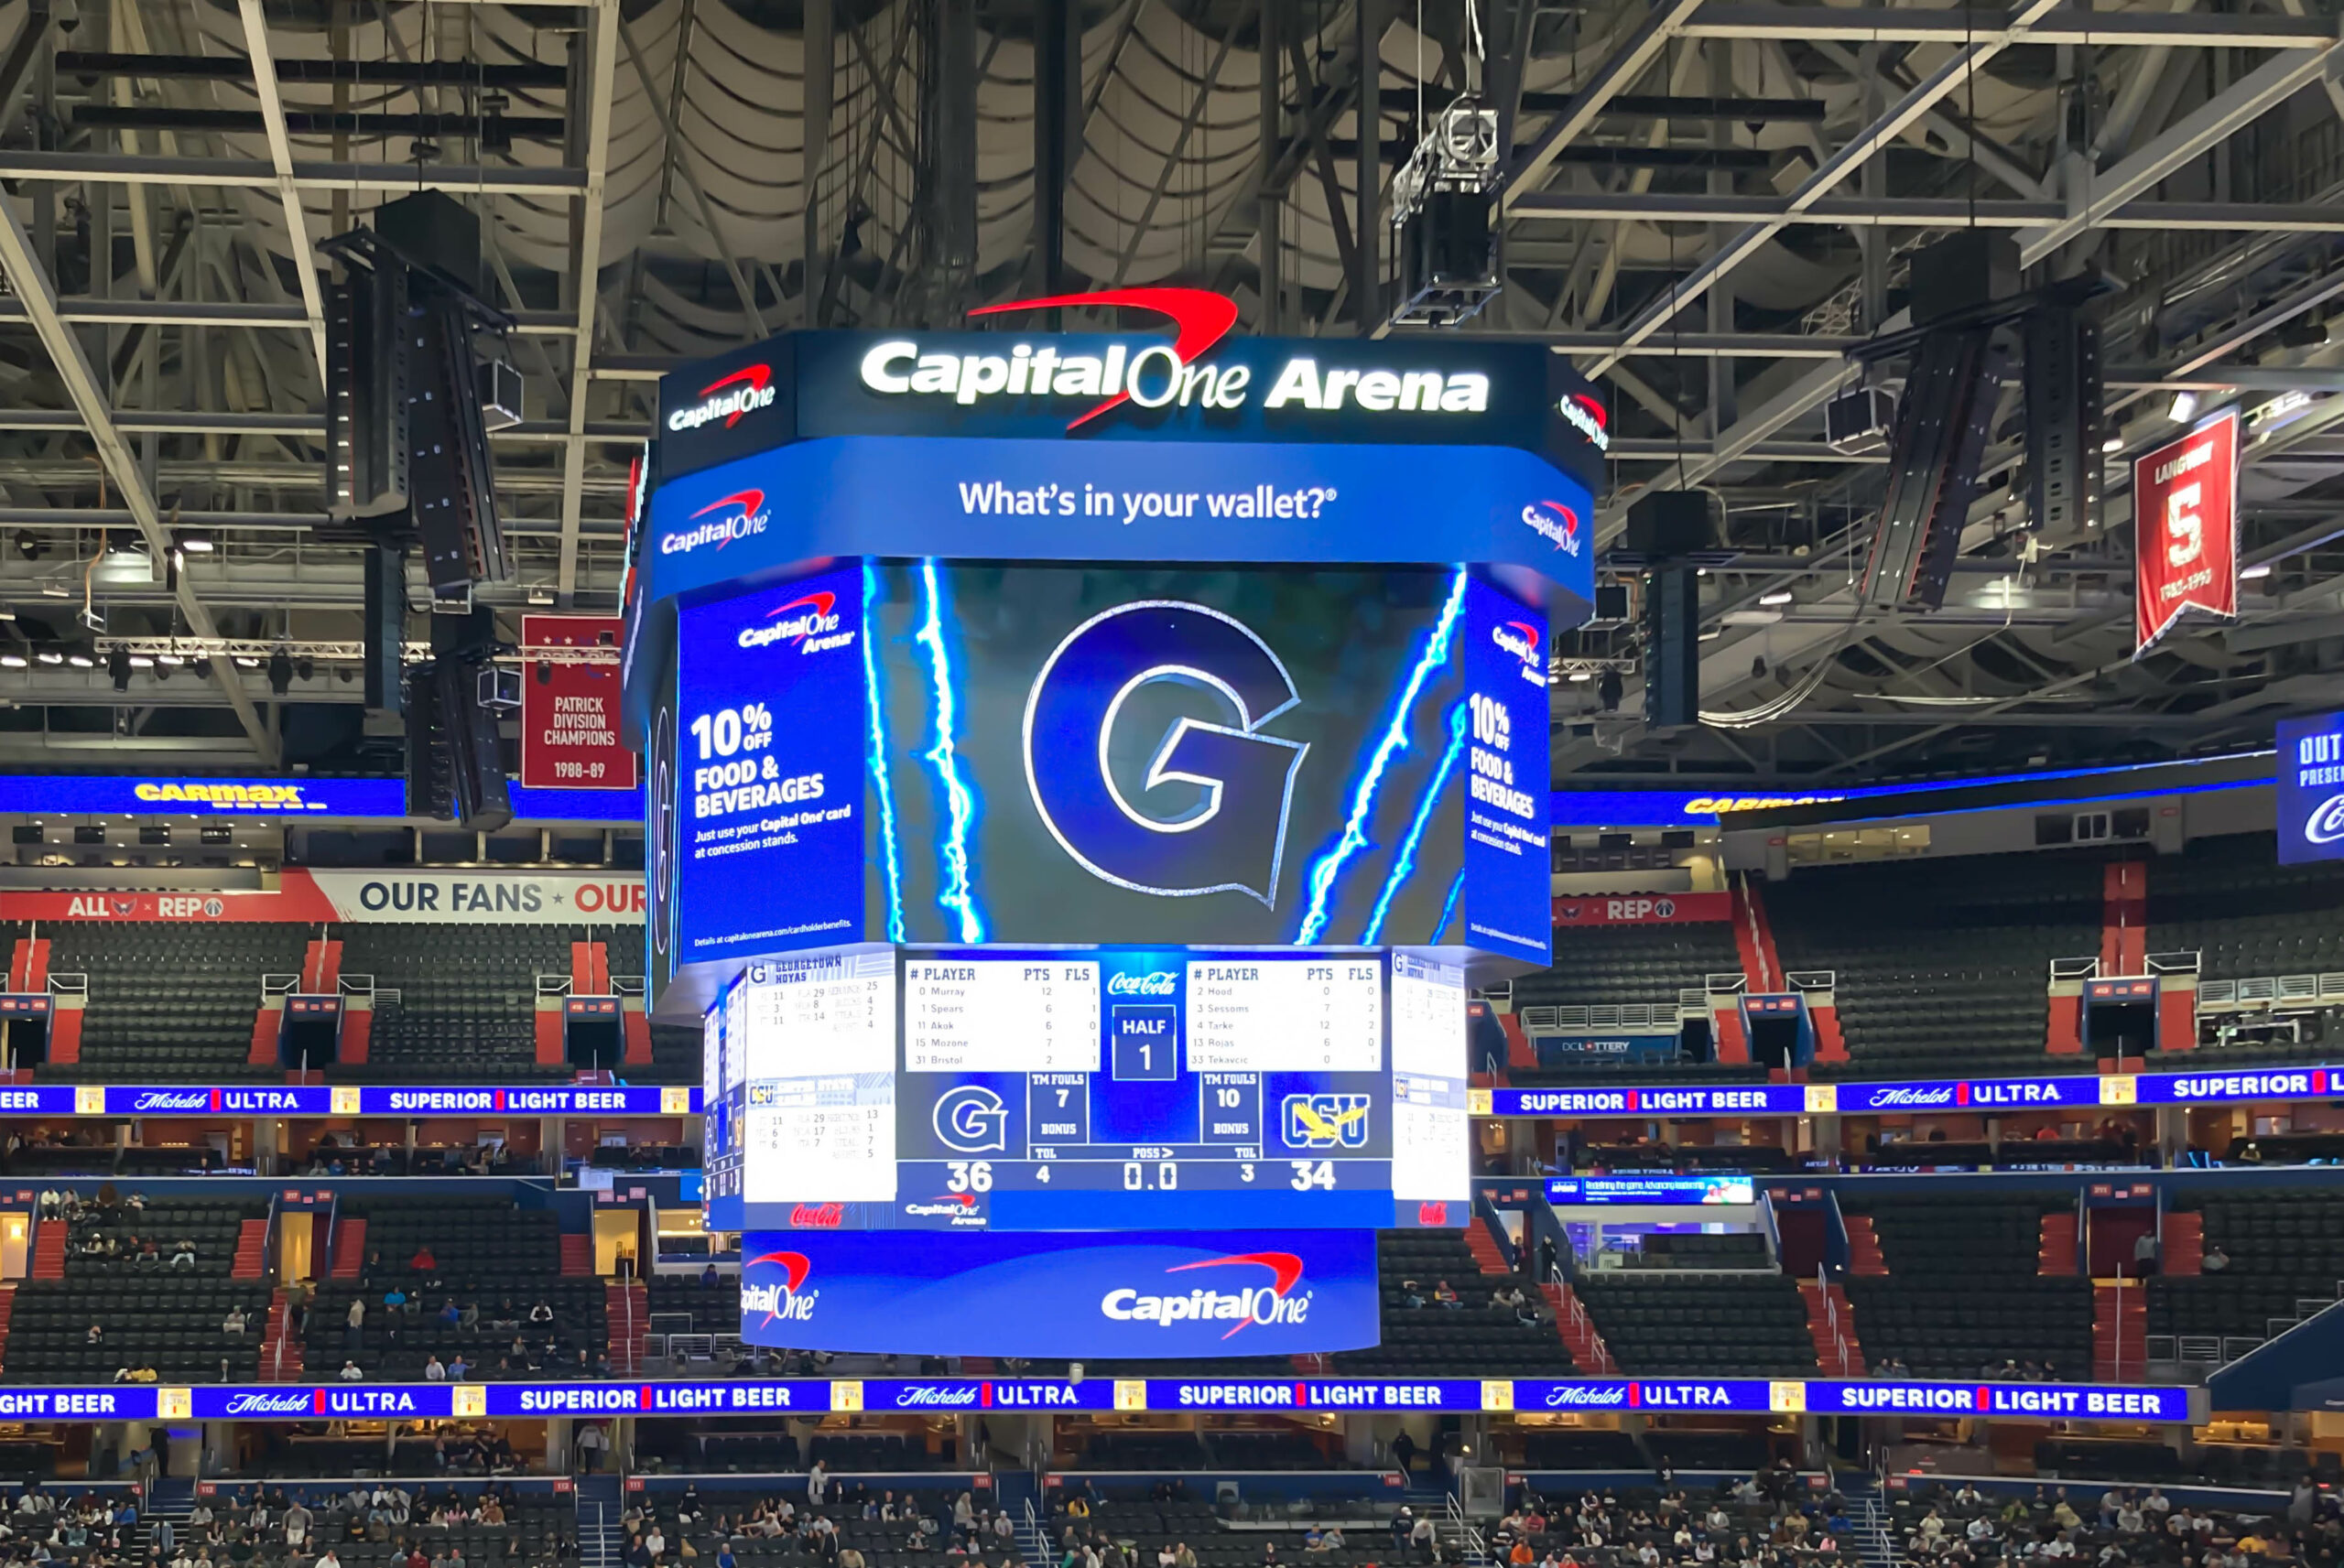 Capital One Arena Featured Live Event Tickets & 2023 Schedules | SeatGeek